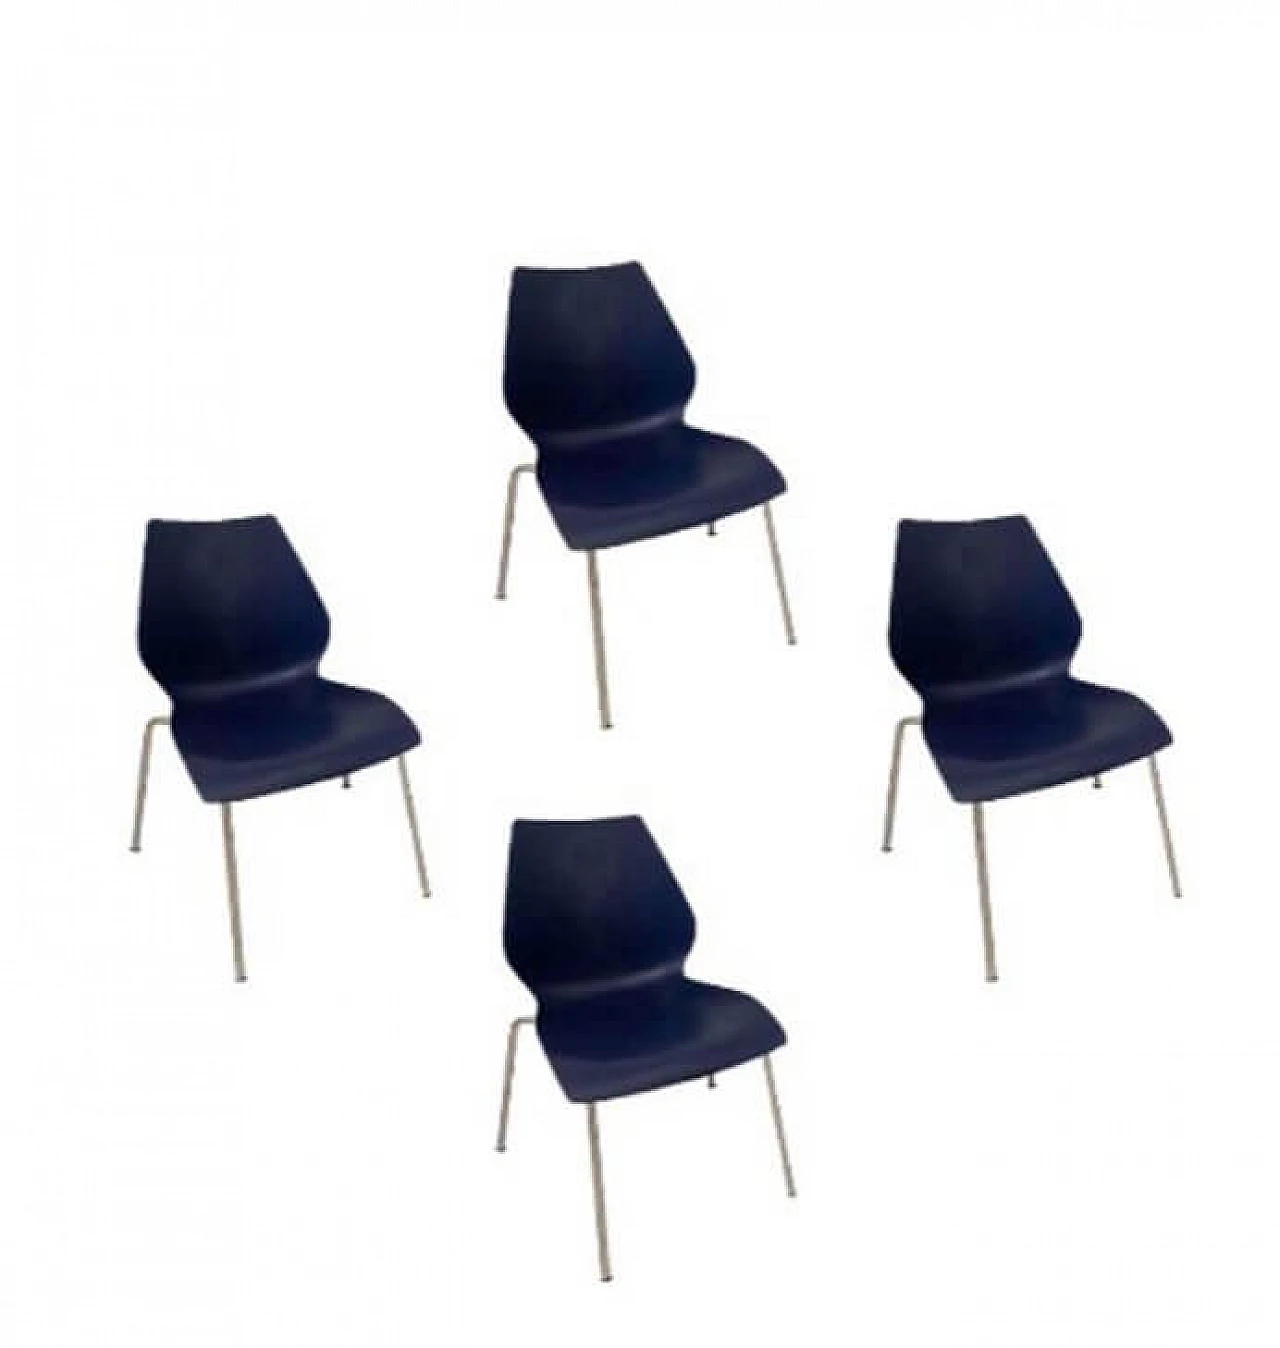 4 Maui Chairs by Vico Magistretti for Kartell, 1990s 1